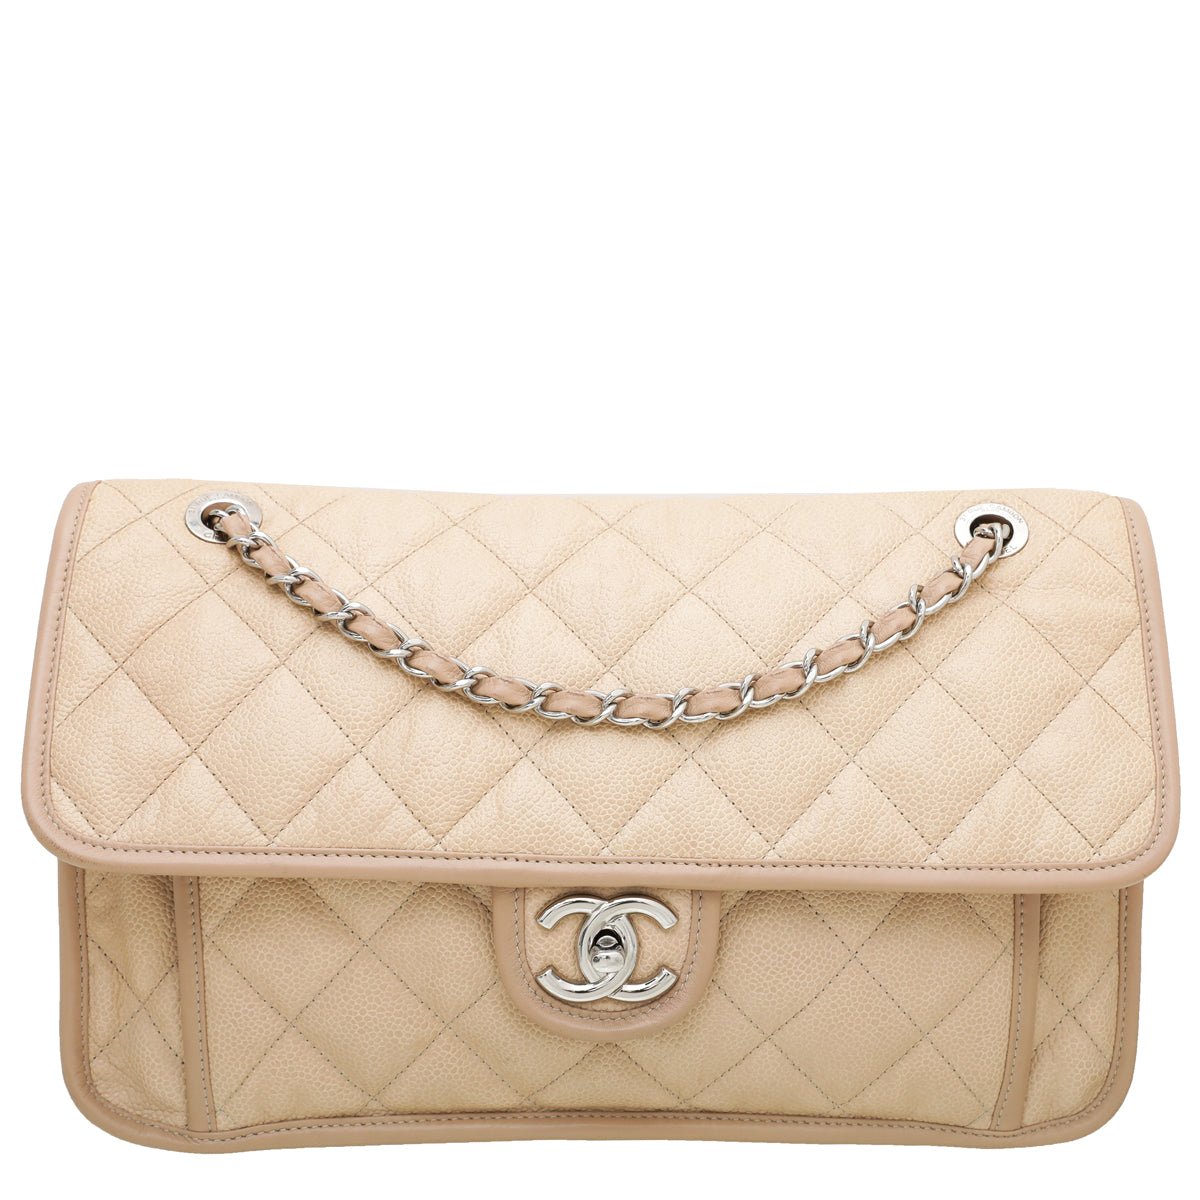 The Closet - Chanel Beige CC French Riviera Flap Bag | The Closet